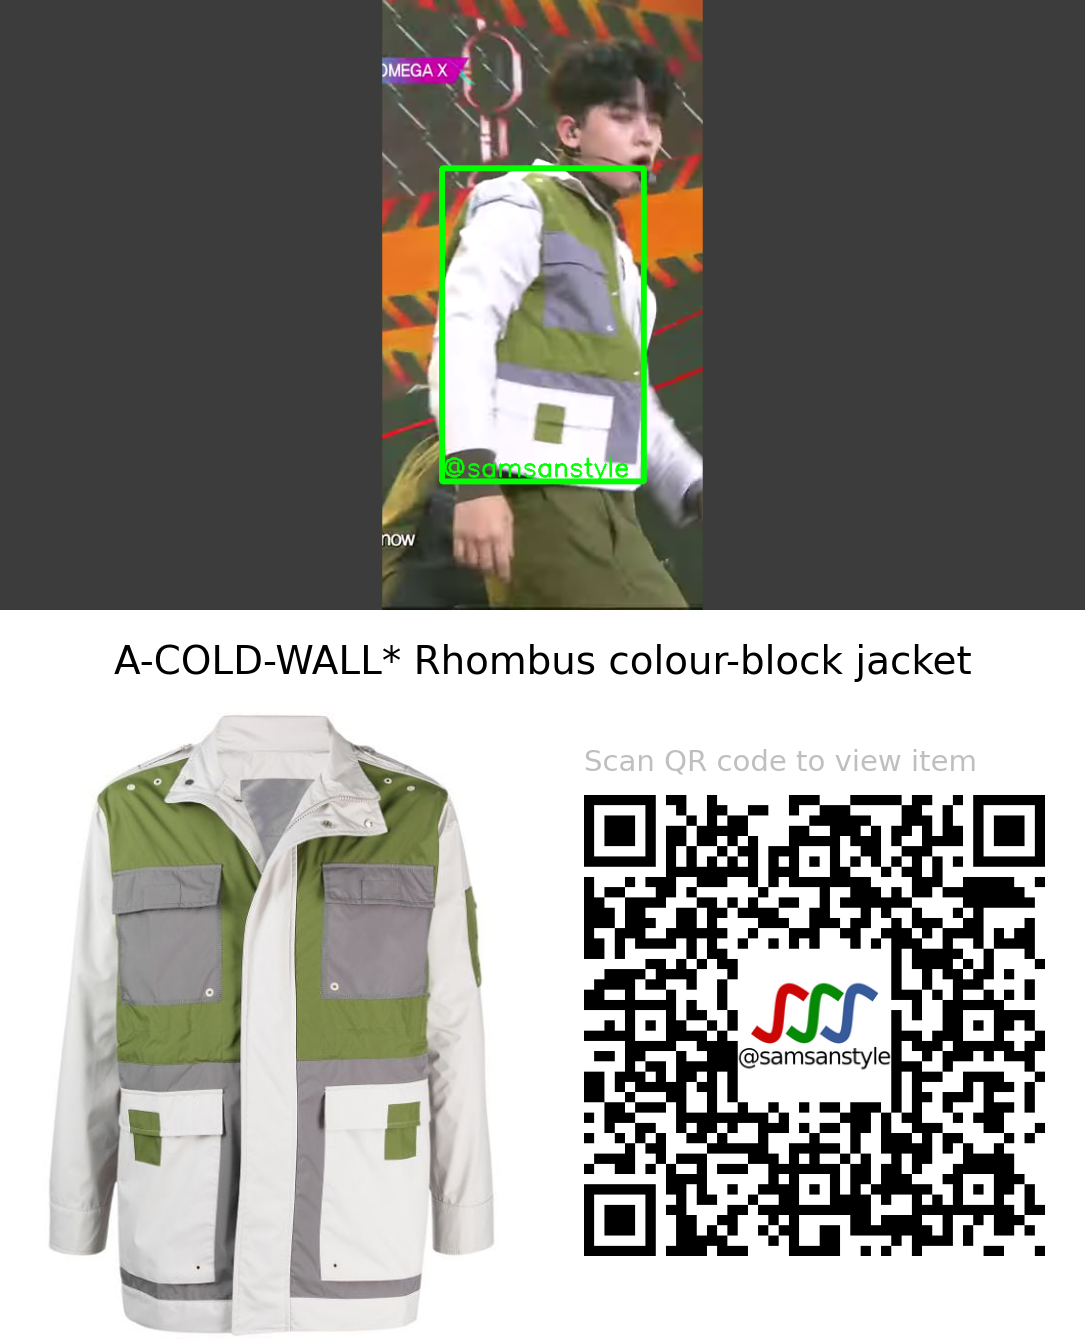 OMEGA X Hyuk | WHAT’S GOIN’ ON KBS Music Bank | A-COLD-WALL* Rhombus colour-block jacket